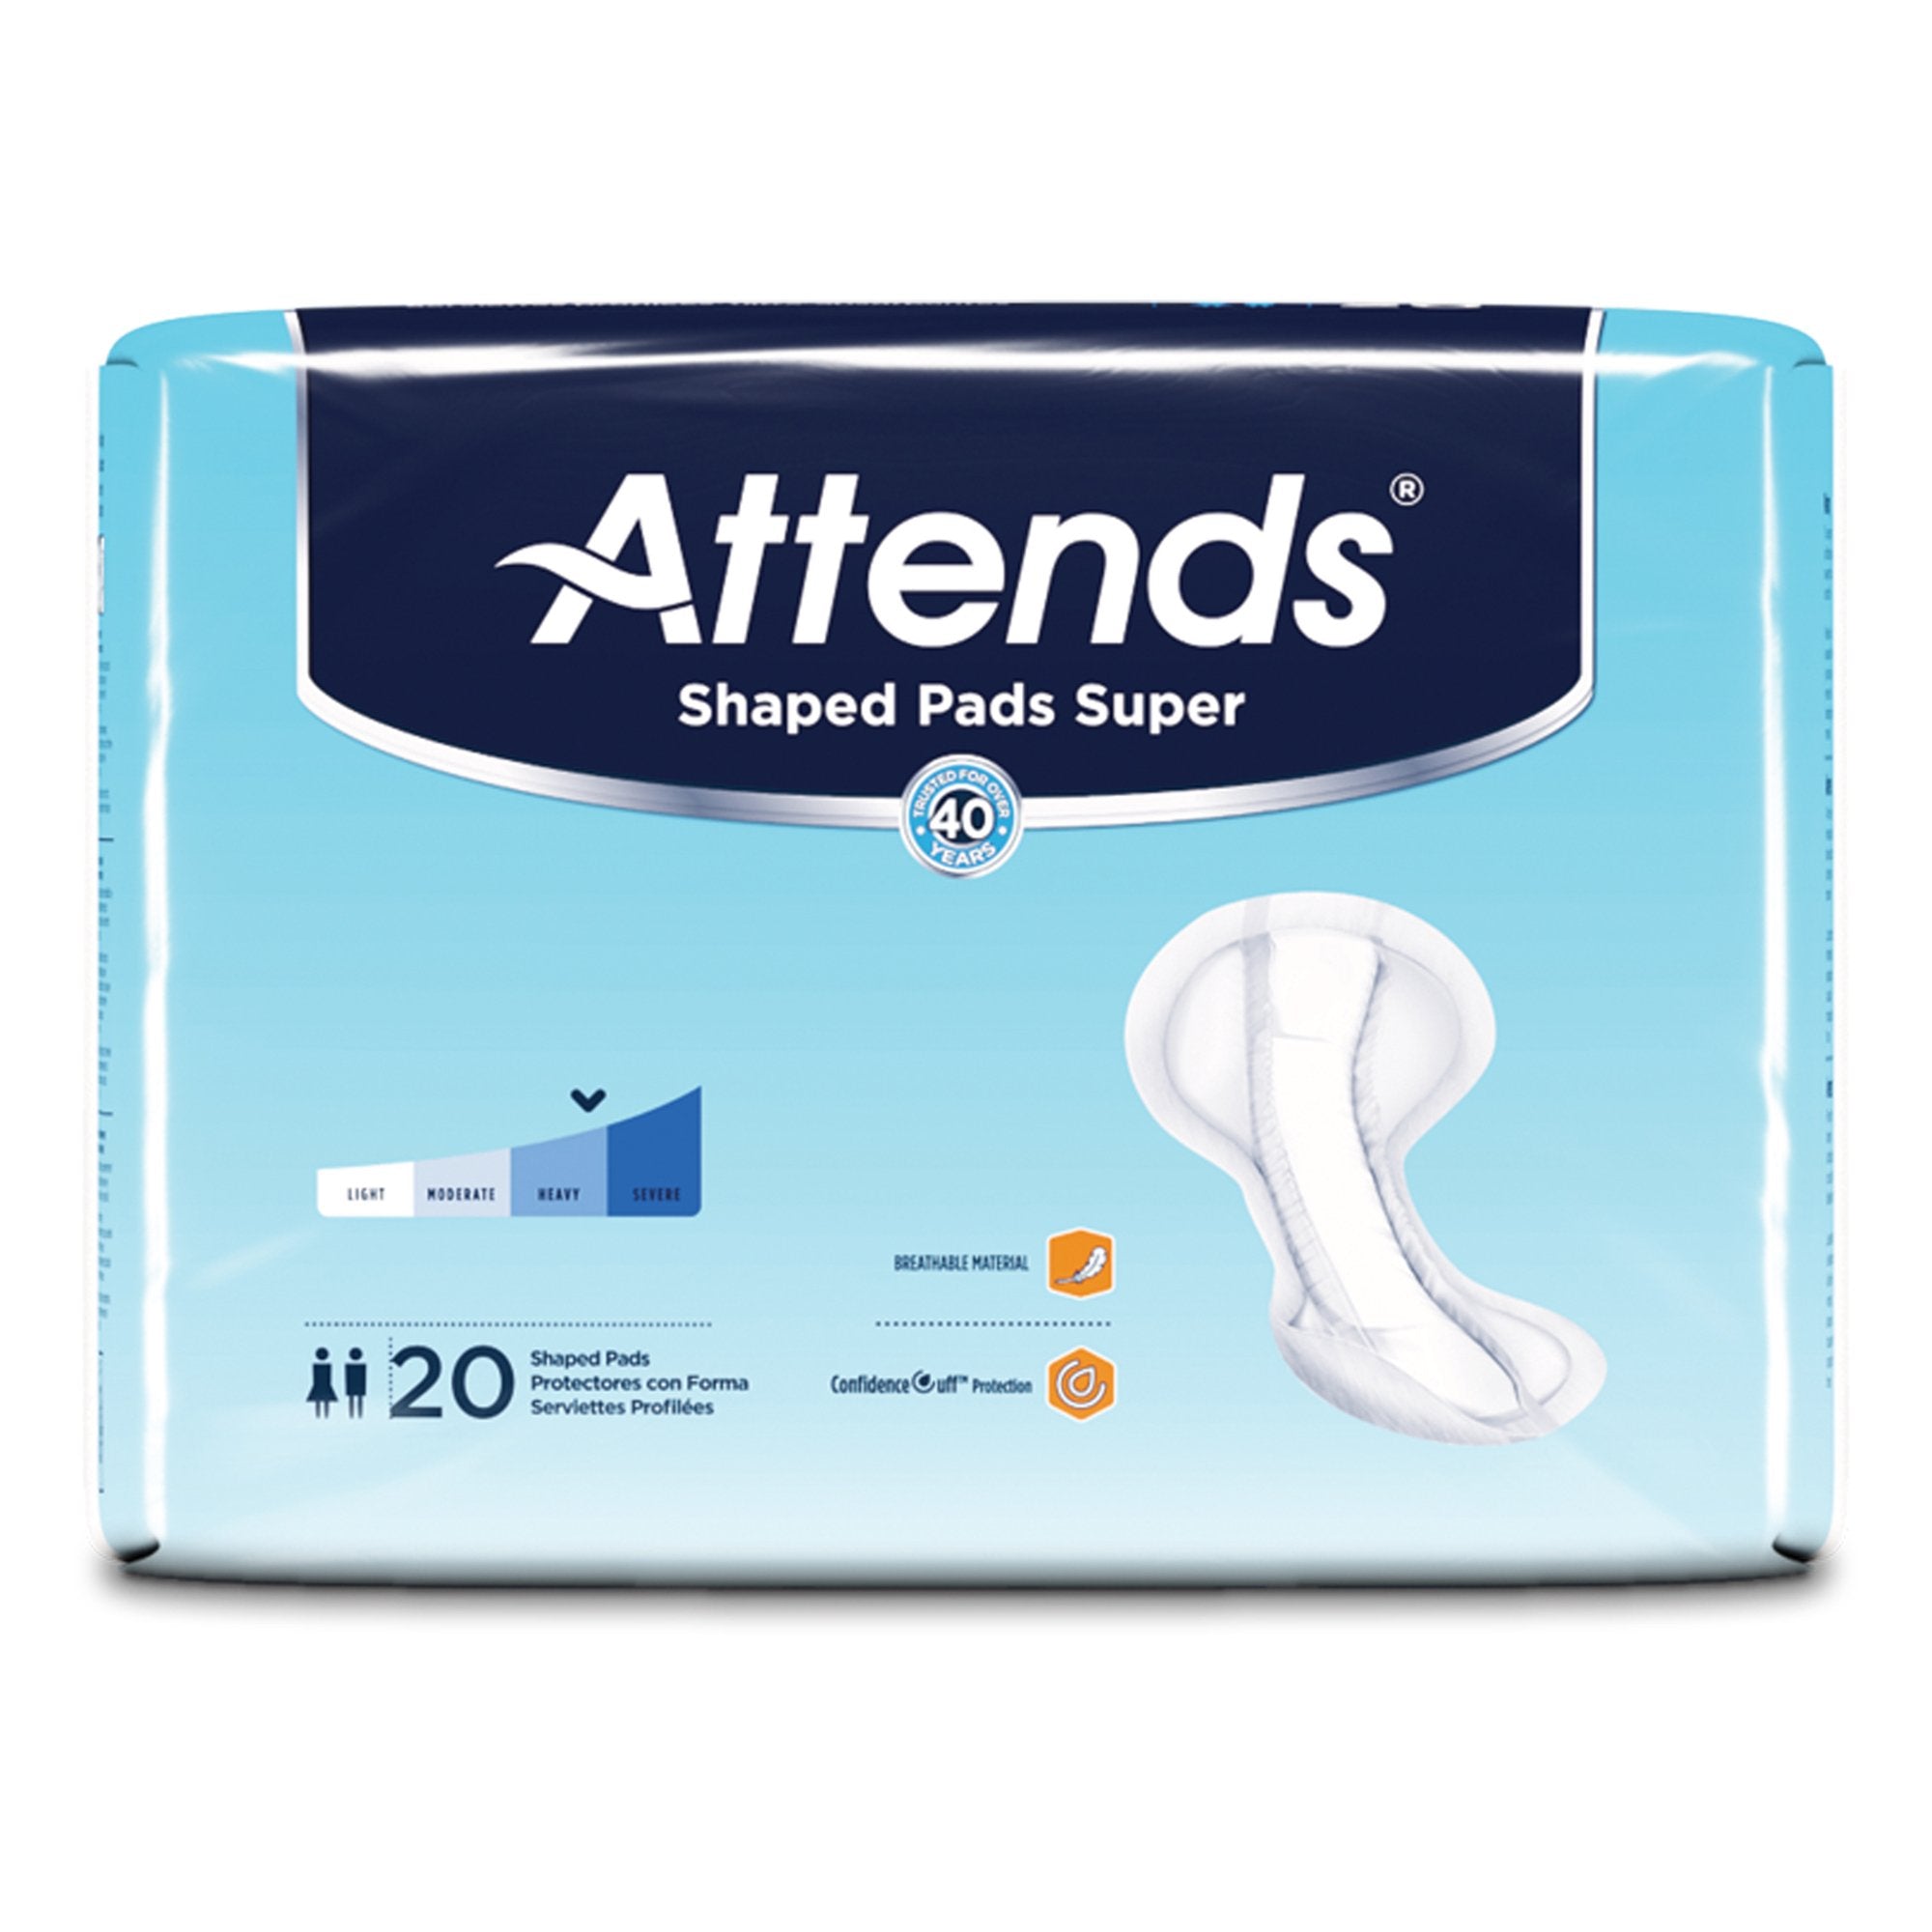 Bladder Control Pad Attends® Shaped Pads Super 13 X 27.2 Inch Heavy Absorbency Polymer Core One Size Fits Most